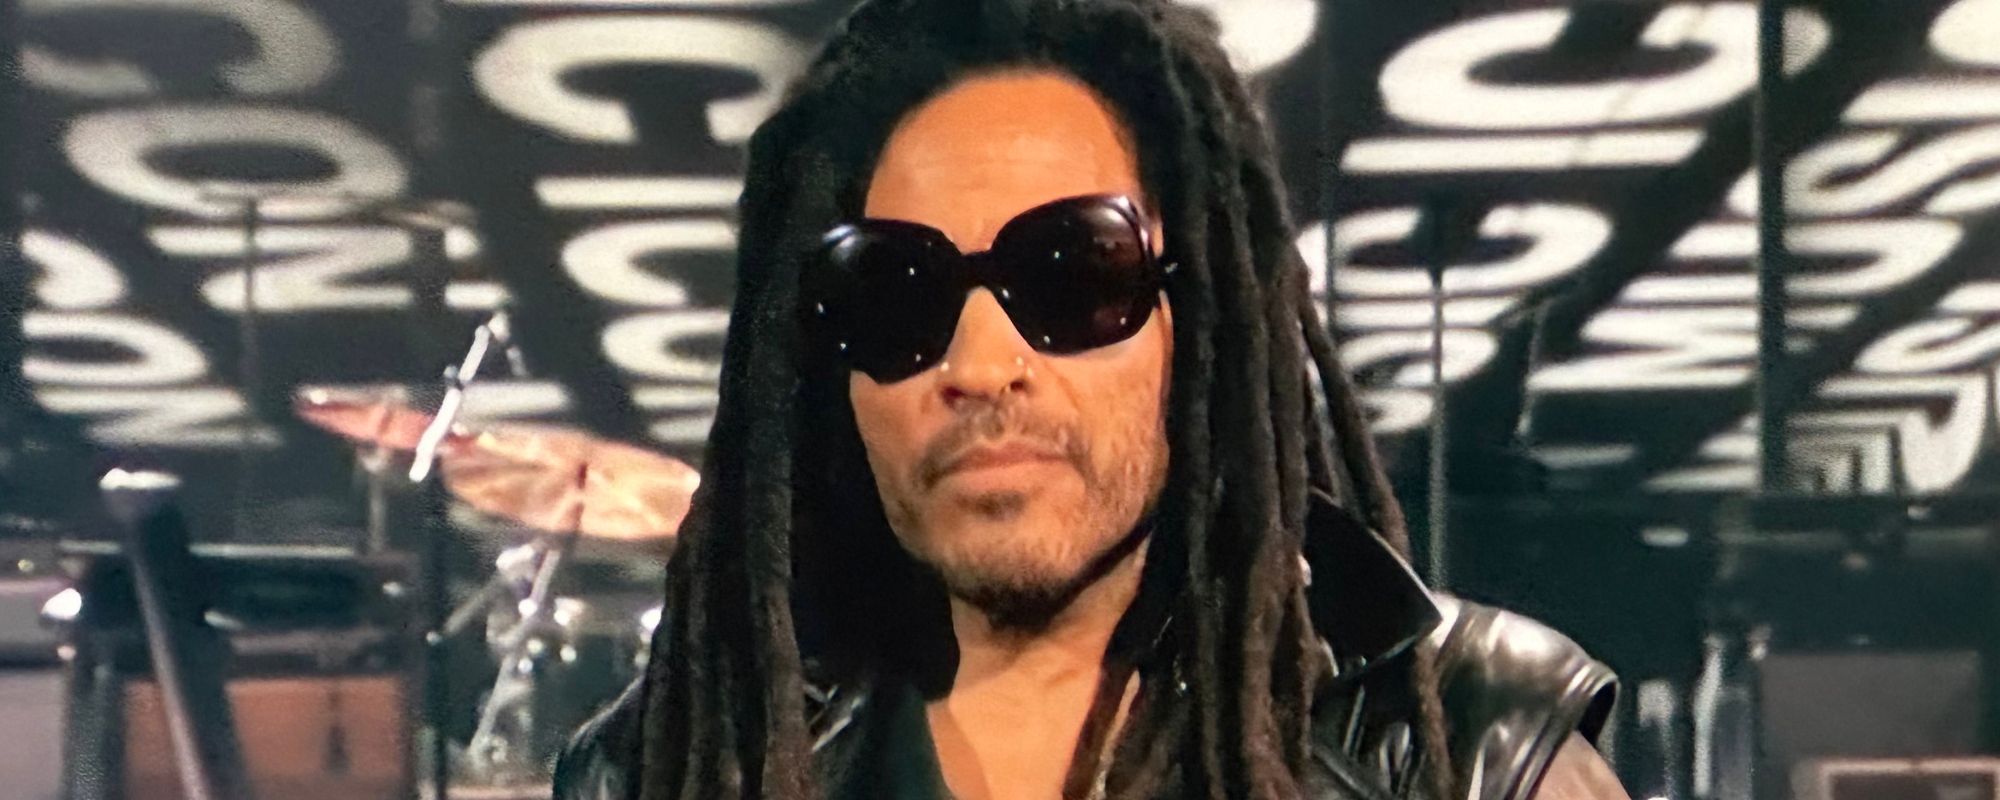 Lenny Kravitz’s Iconic Performance of Greatest Hits at People’s Choice Awards Has Fans Soaring